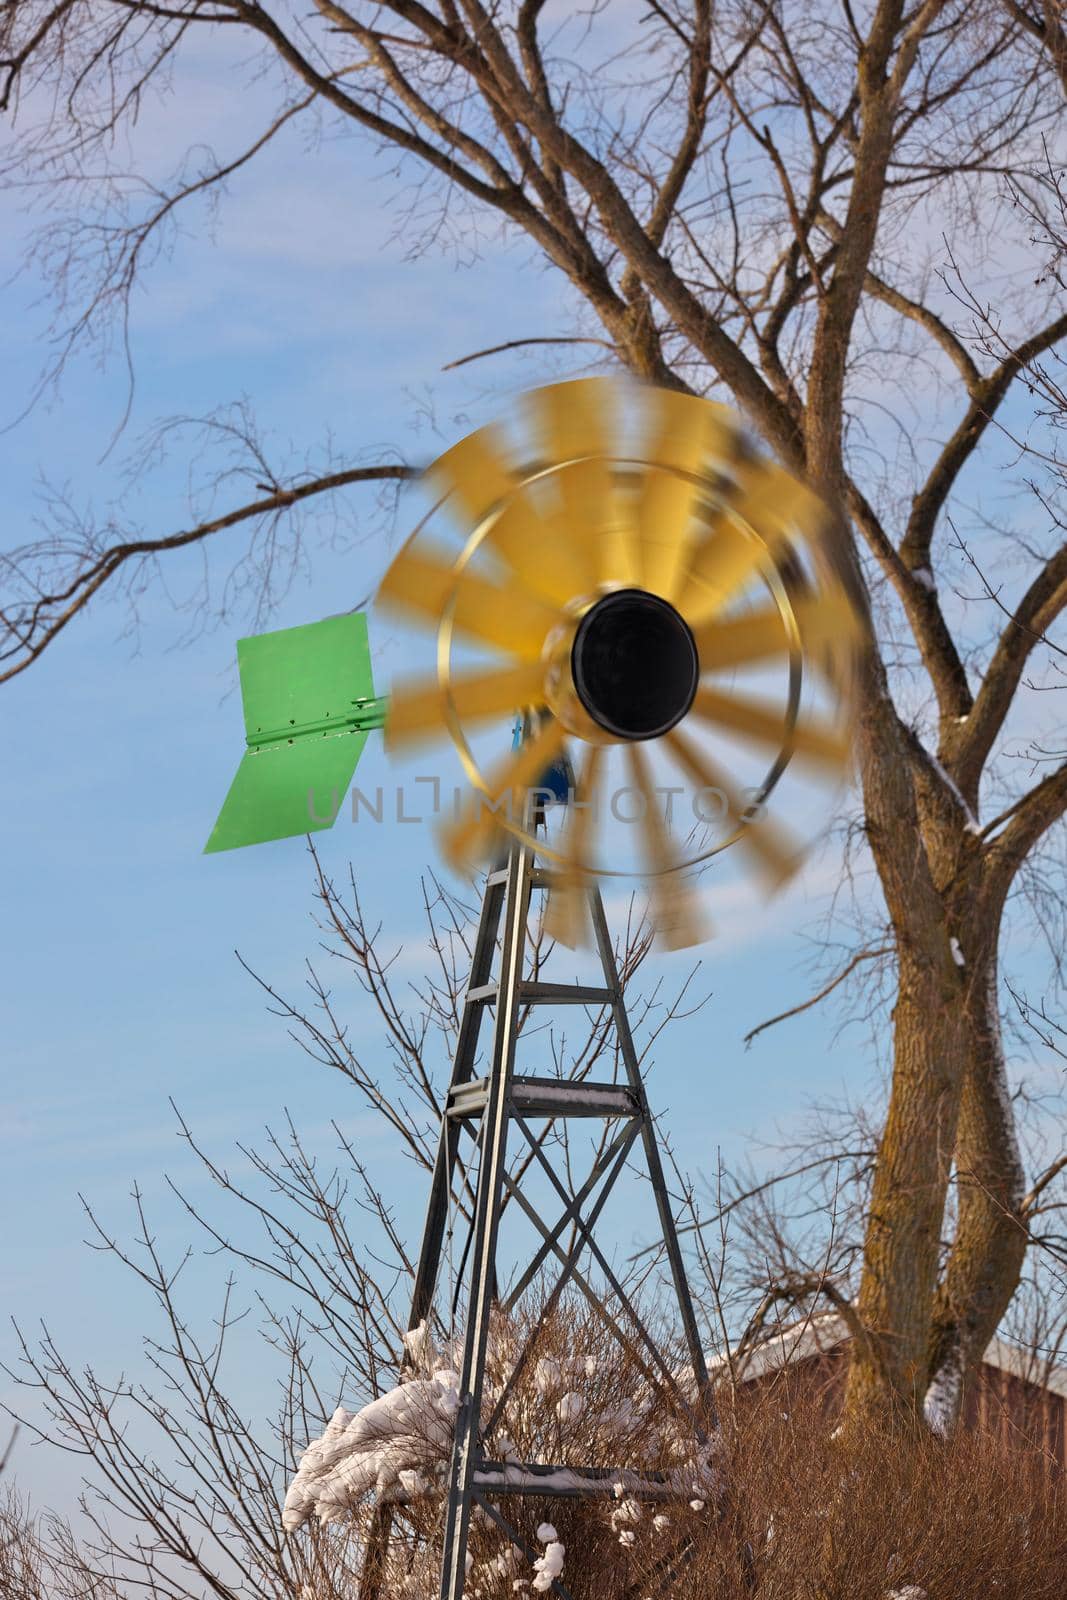 A small Windmill or Wind Turbine in a Rural Setting with Spinning Blades by markvandam